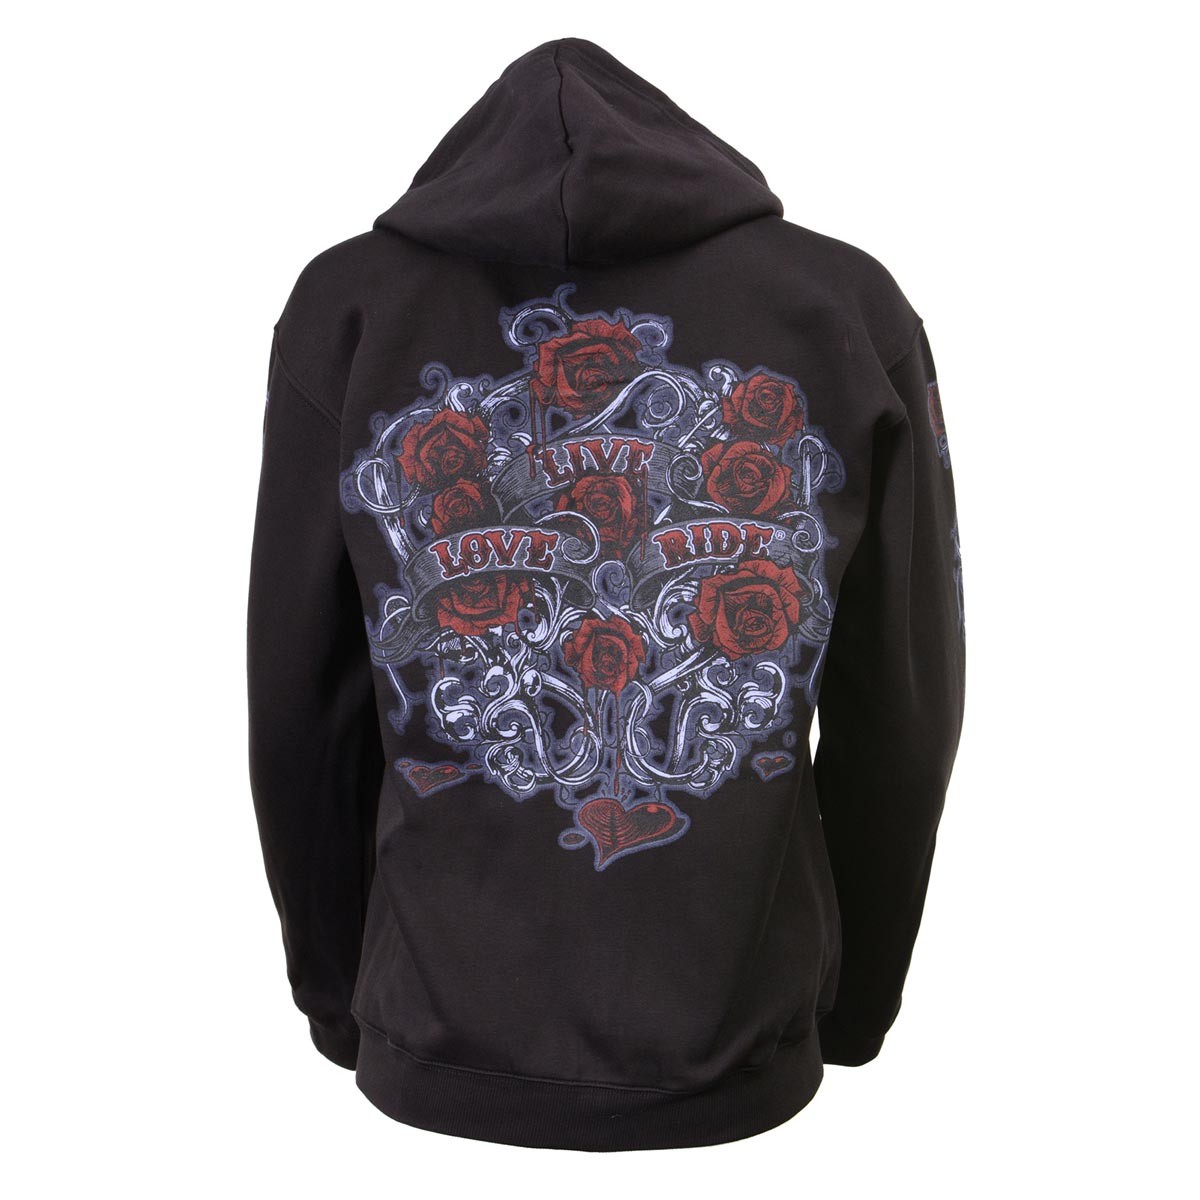 Milwaukee Leather MPLH228000 Women's Black Hoodie Sweatshirt with Live, Love, Ride and Roses Artwork Print